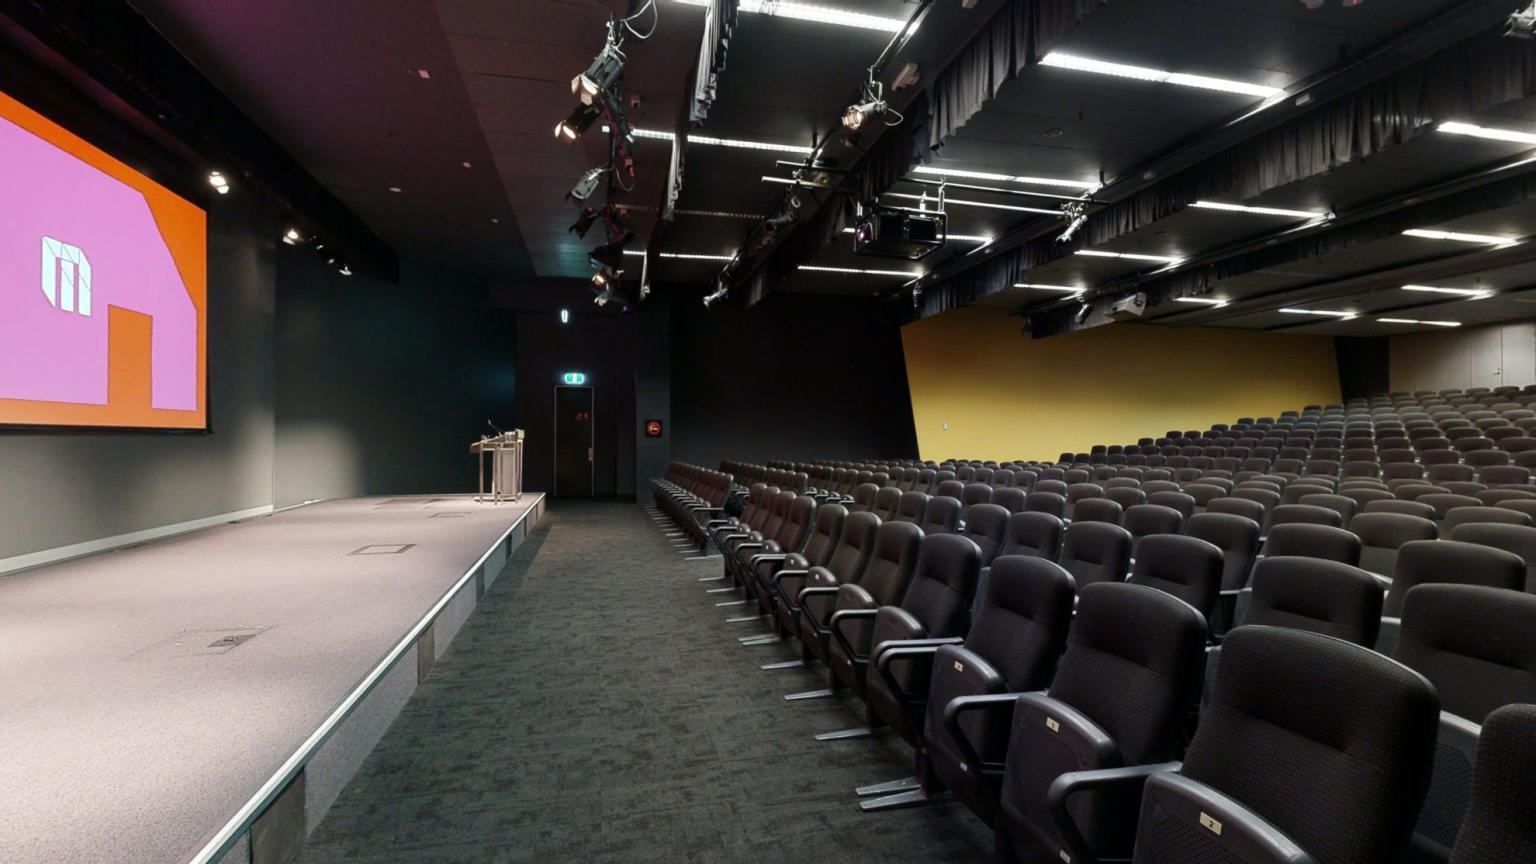 An expansive auditorium featuring multiple rows of seating and a prominent projector screen for presentations and events.